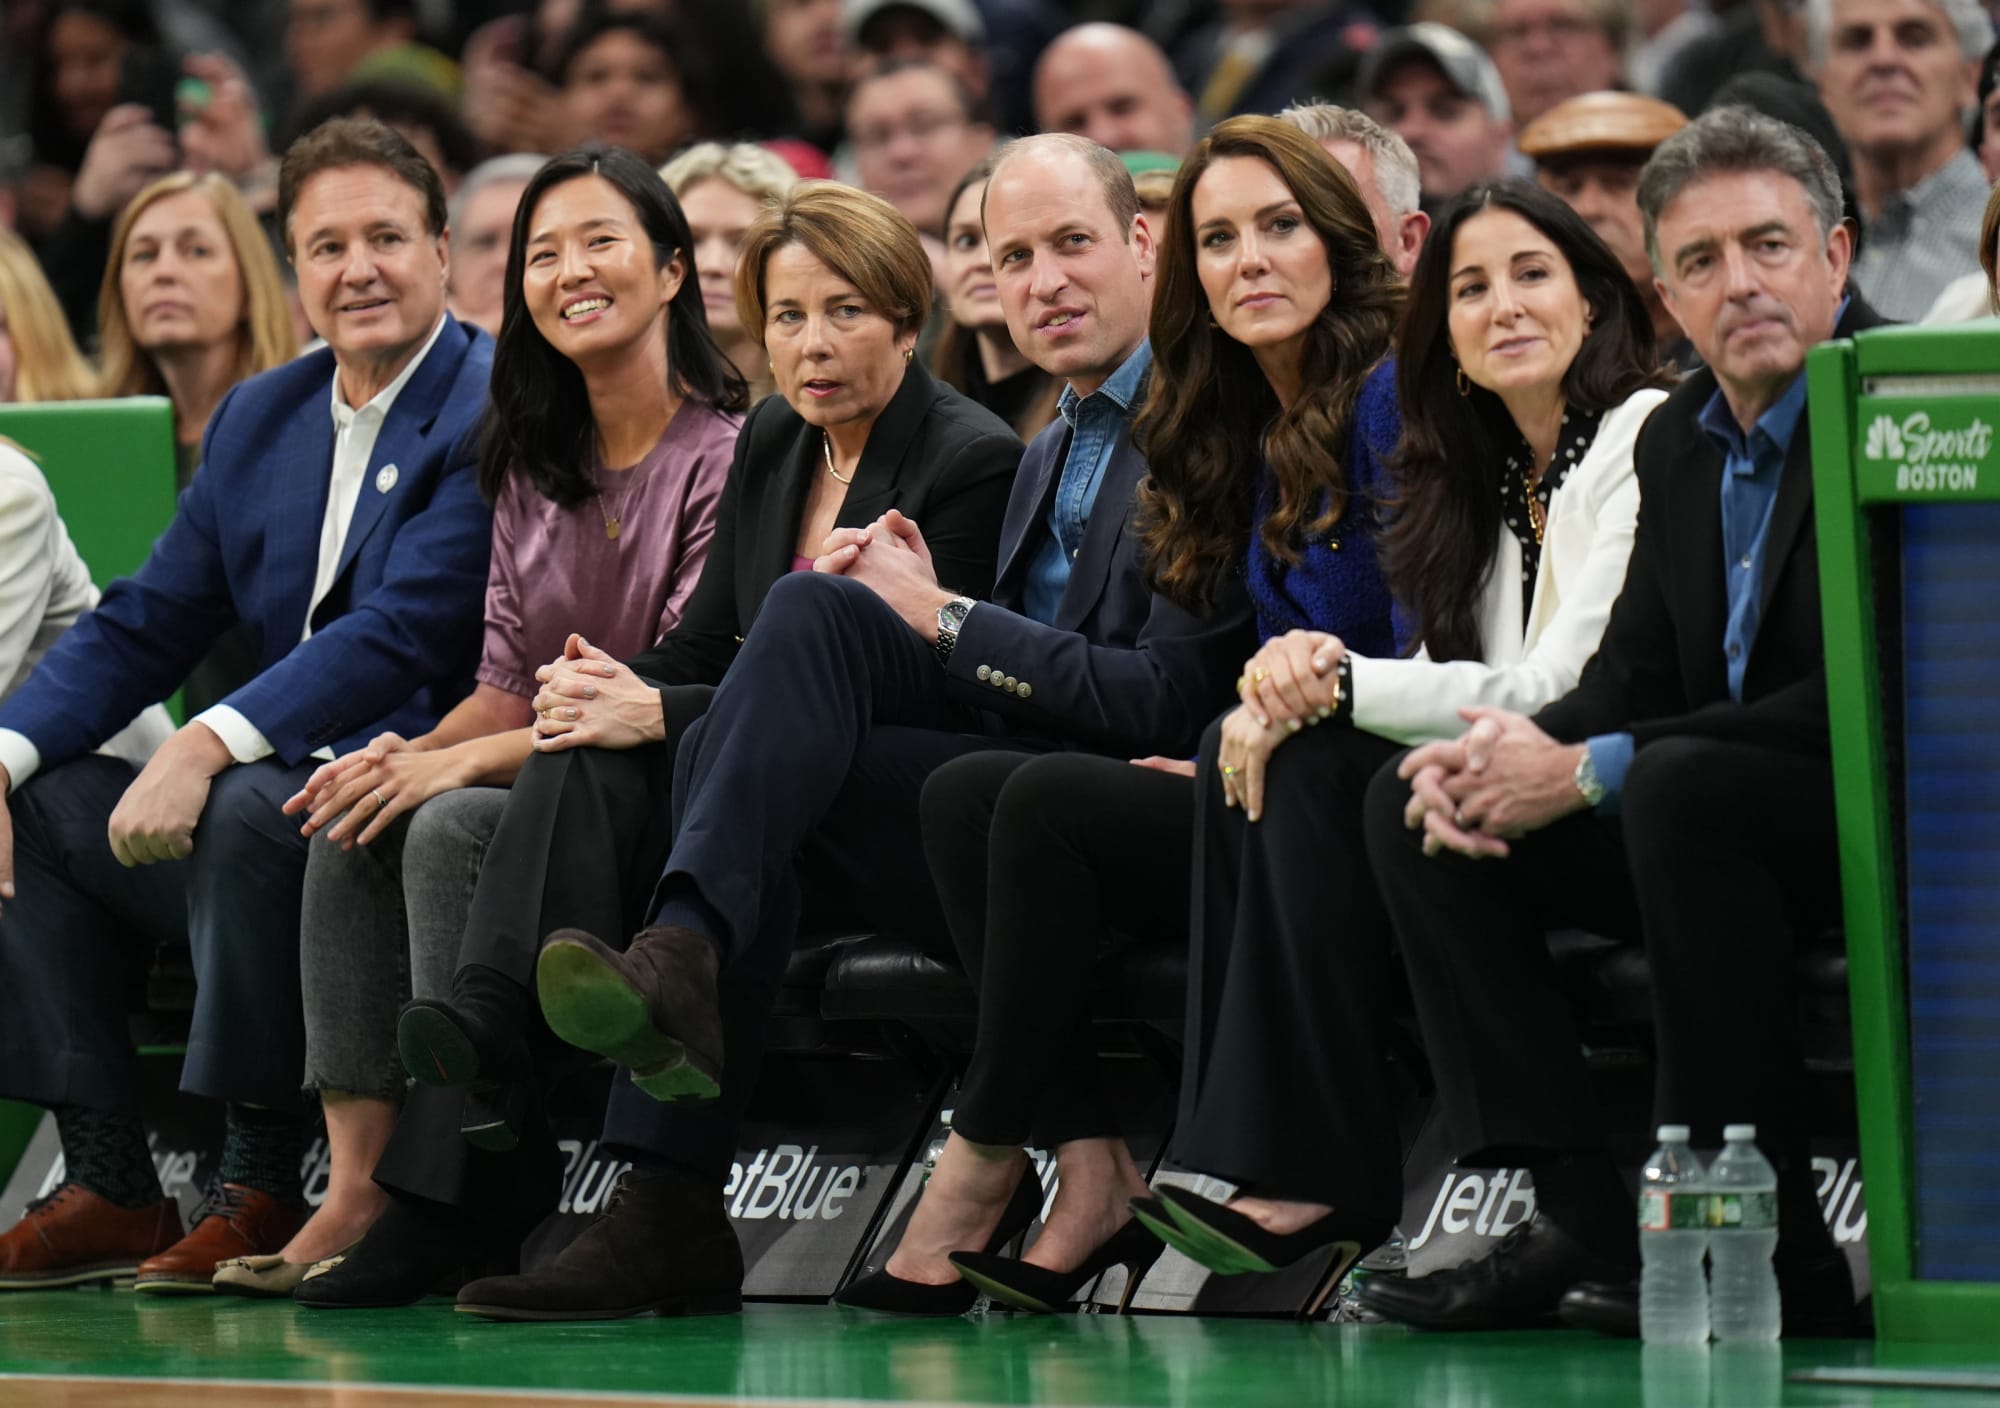 Celtics owner calls team 'overrated', gives 'green light' for luxury-tax  spending - NBC Sports